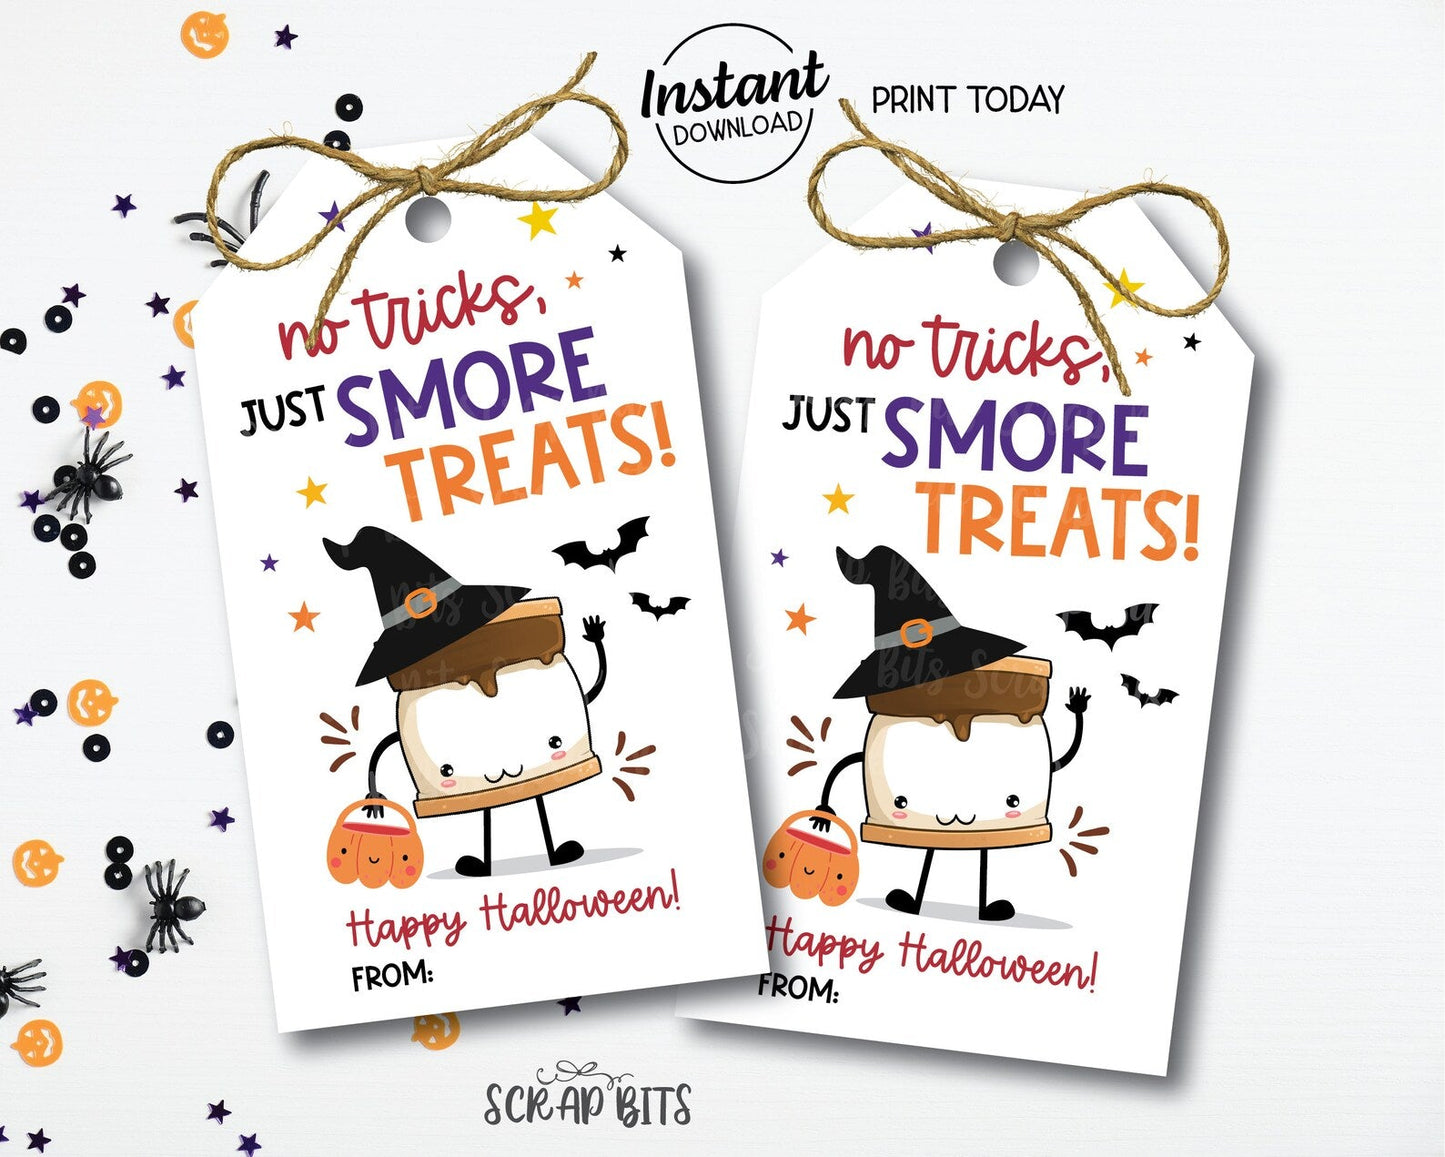 Halloween S'more Tags, No Tricks, Just Smore Treats, Printable Halloween Tags, Instant Download - Scrap Bits